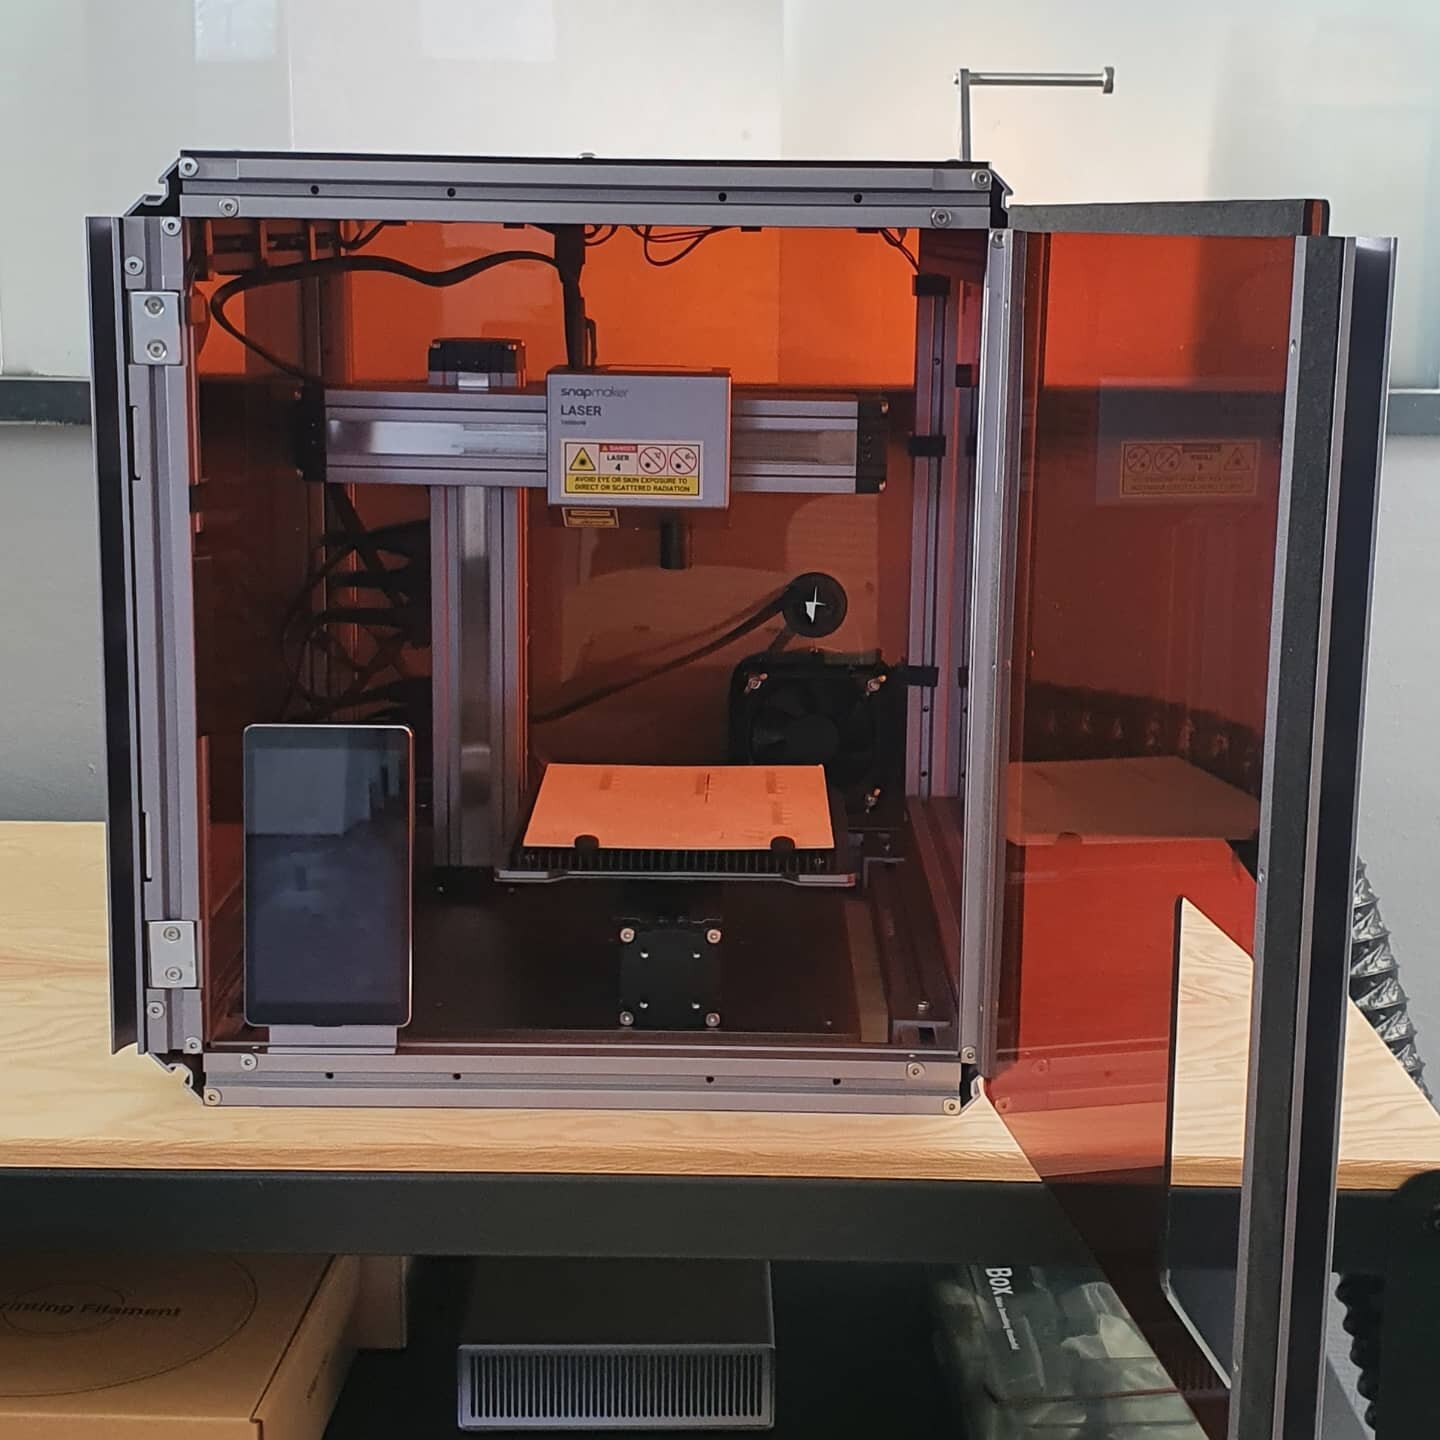 Our 3D printer had arrived! If anybody wants to experiment and try it out, leave us a message and get in touch!